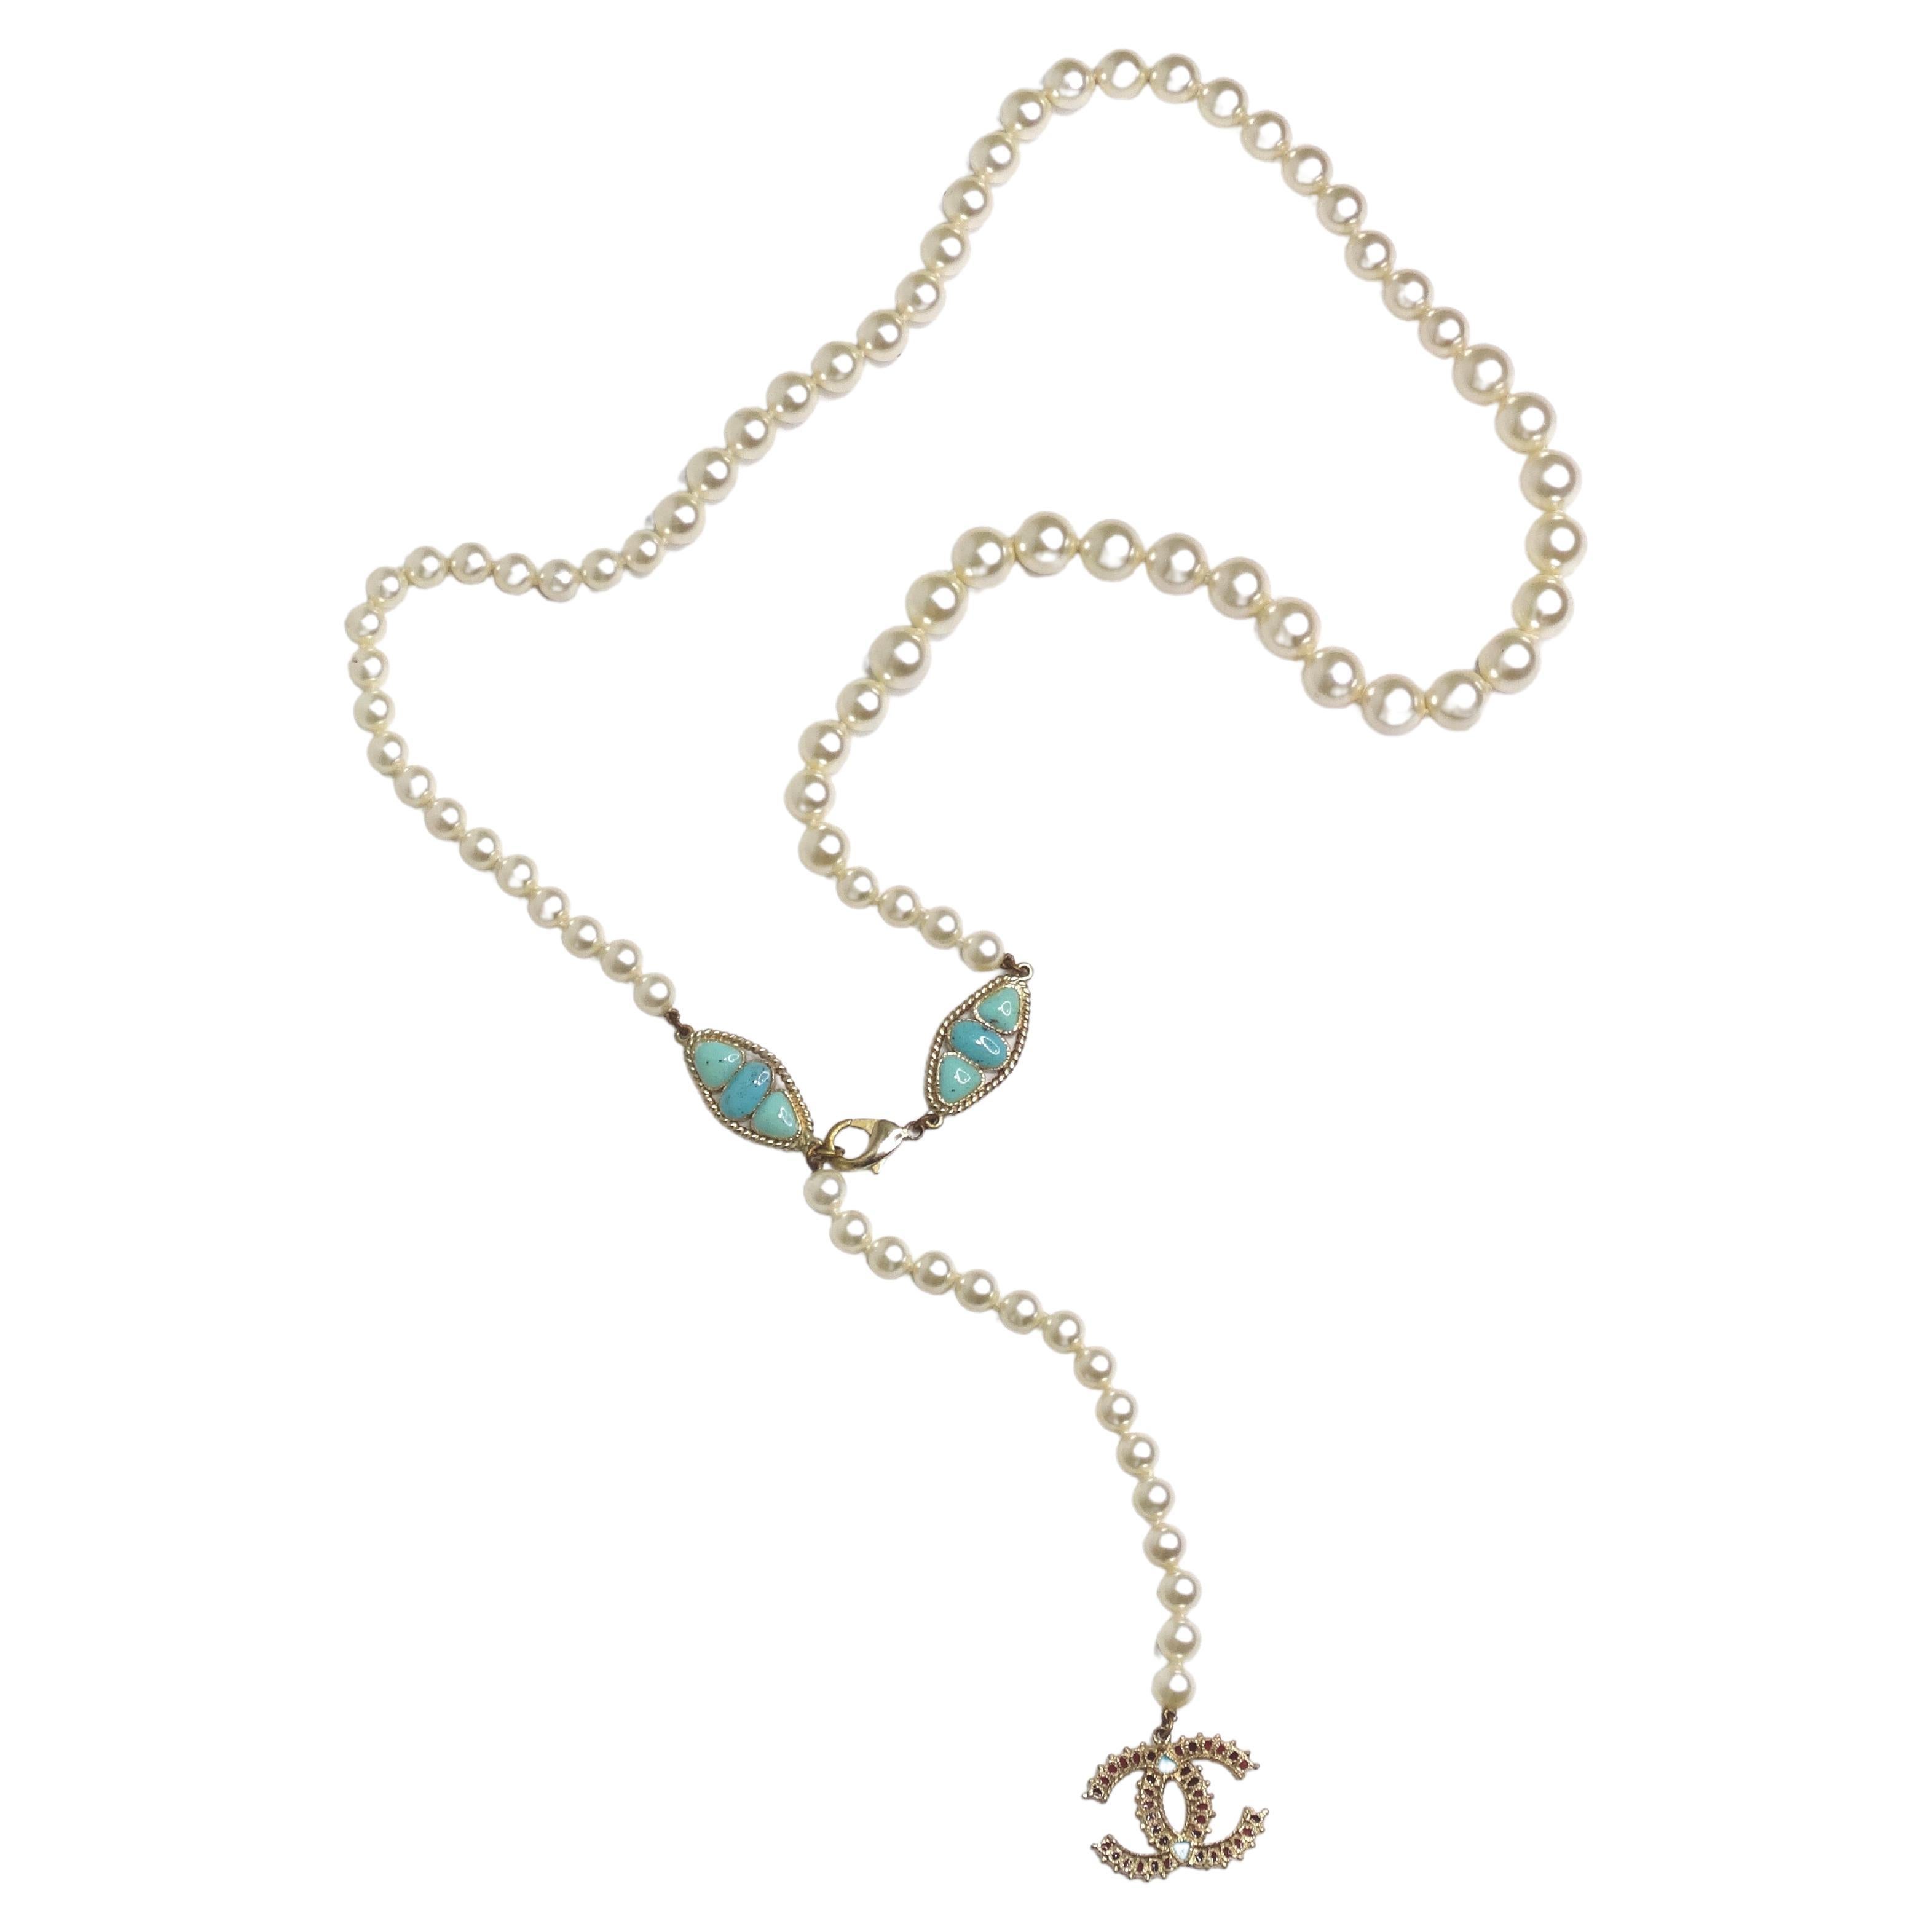 Chanel Paris Dallas Collection White Pearl & Turquoise Necklace